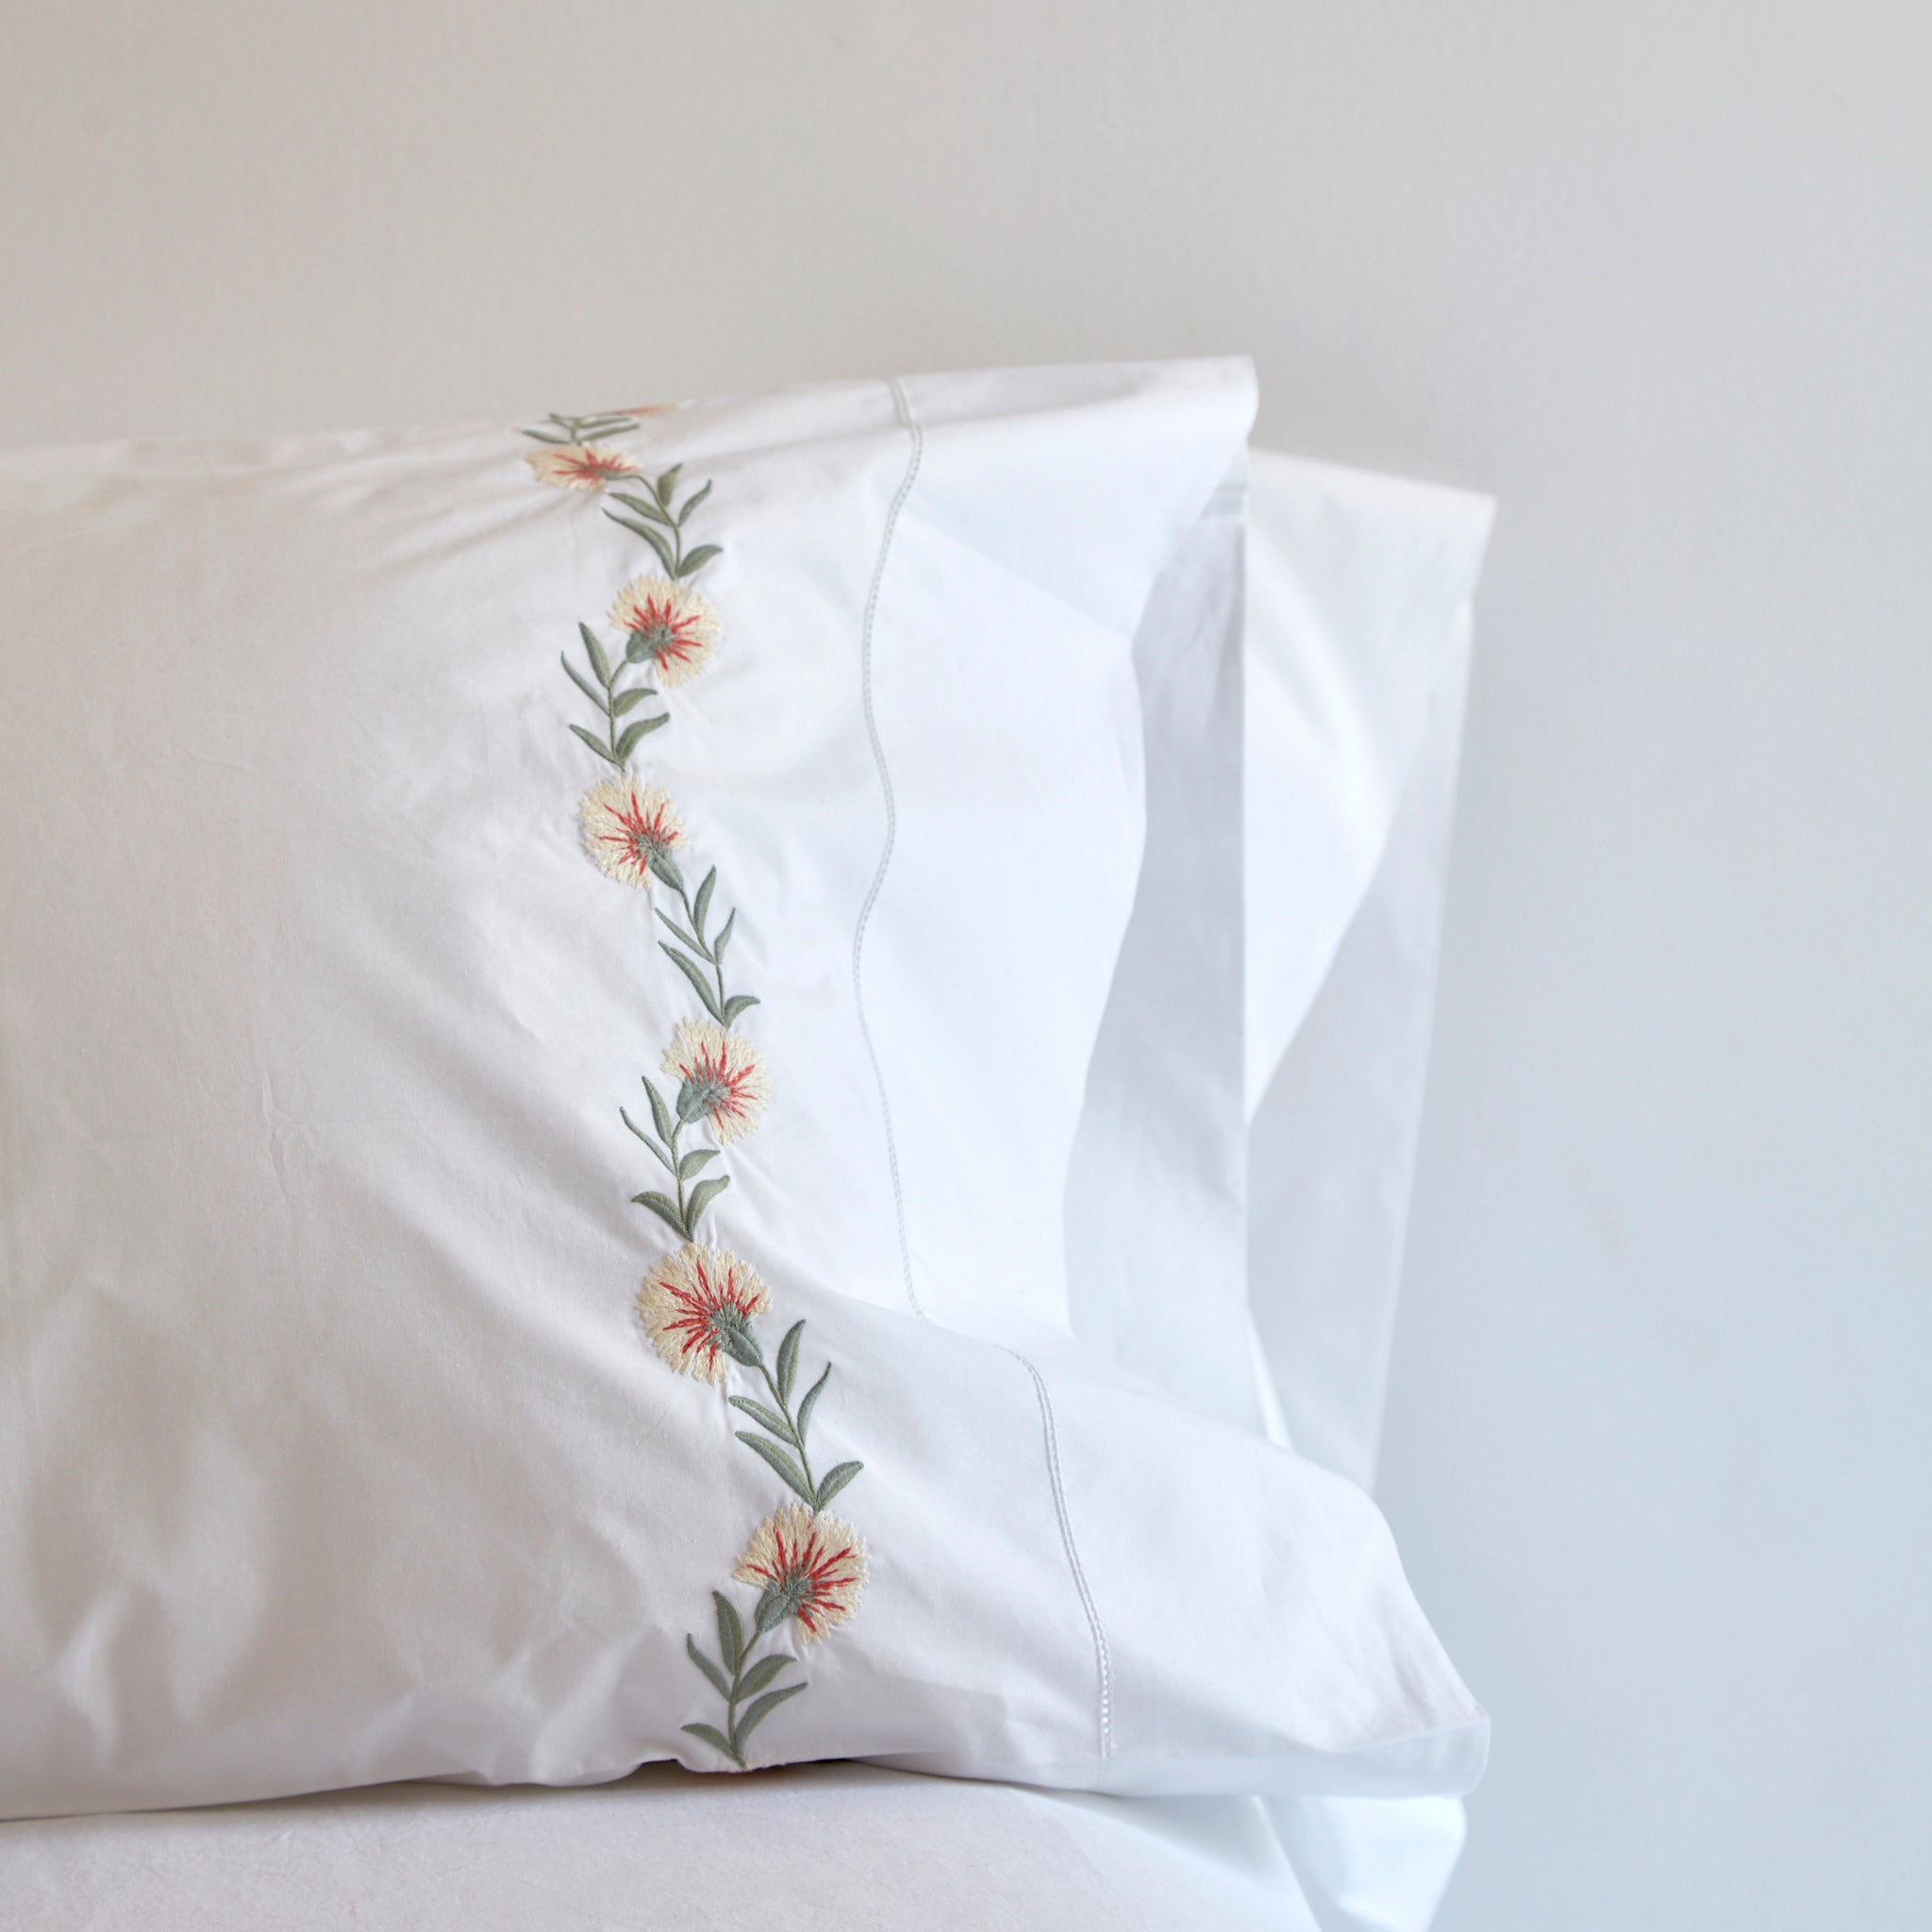 sunnys pop floral bloom pillowcases by matouk 34927 1